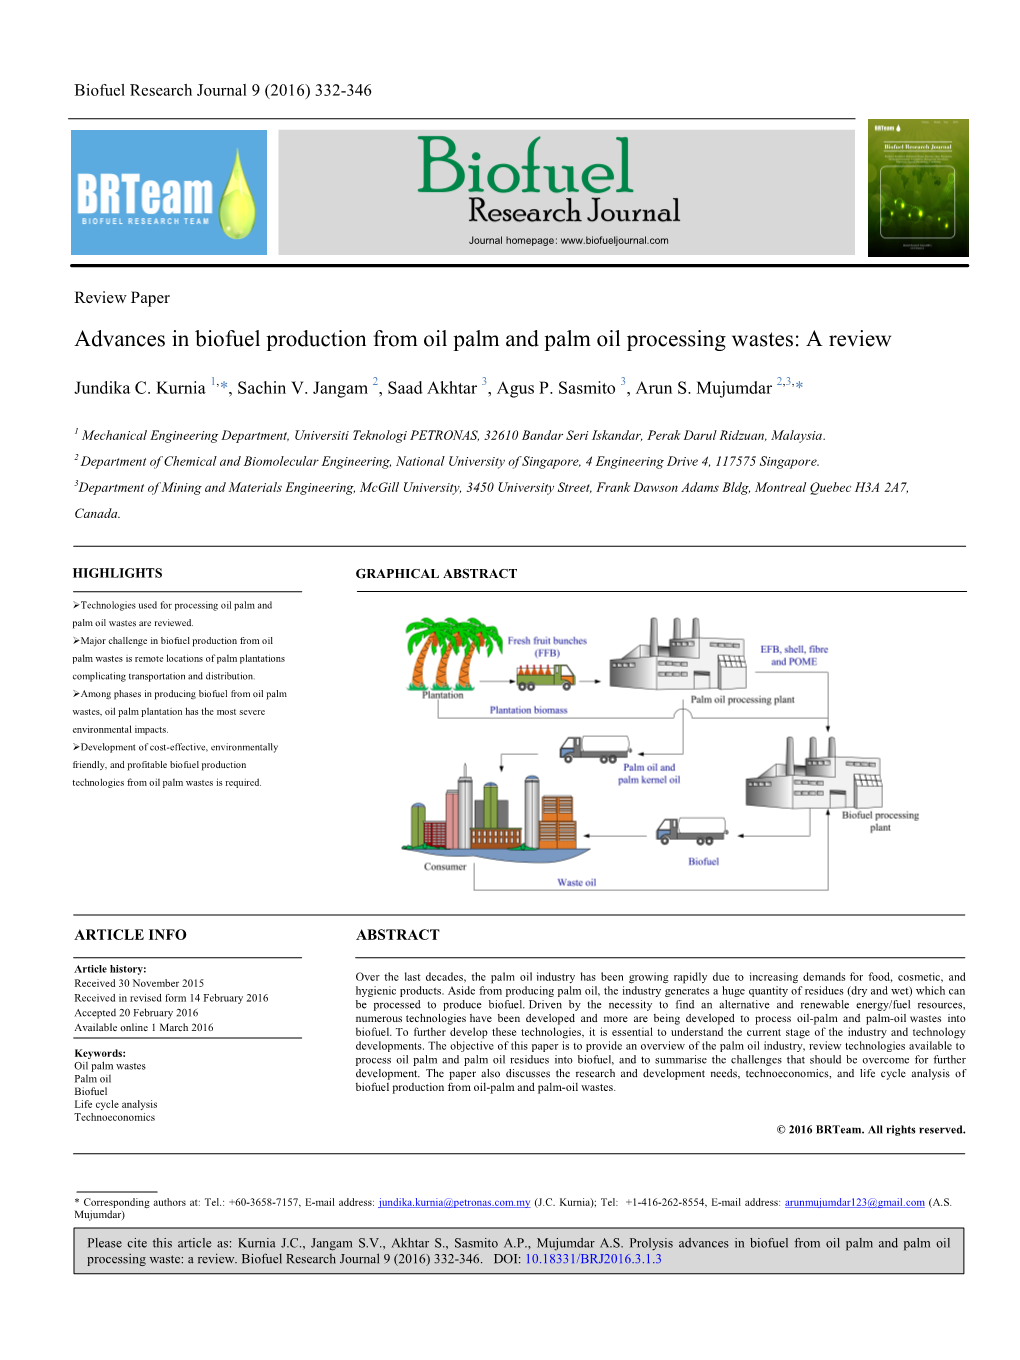 Advances in Biofuel Production from Oil Palm and Palm Oil Processing Wastes: a Review